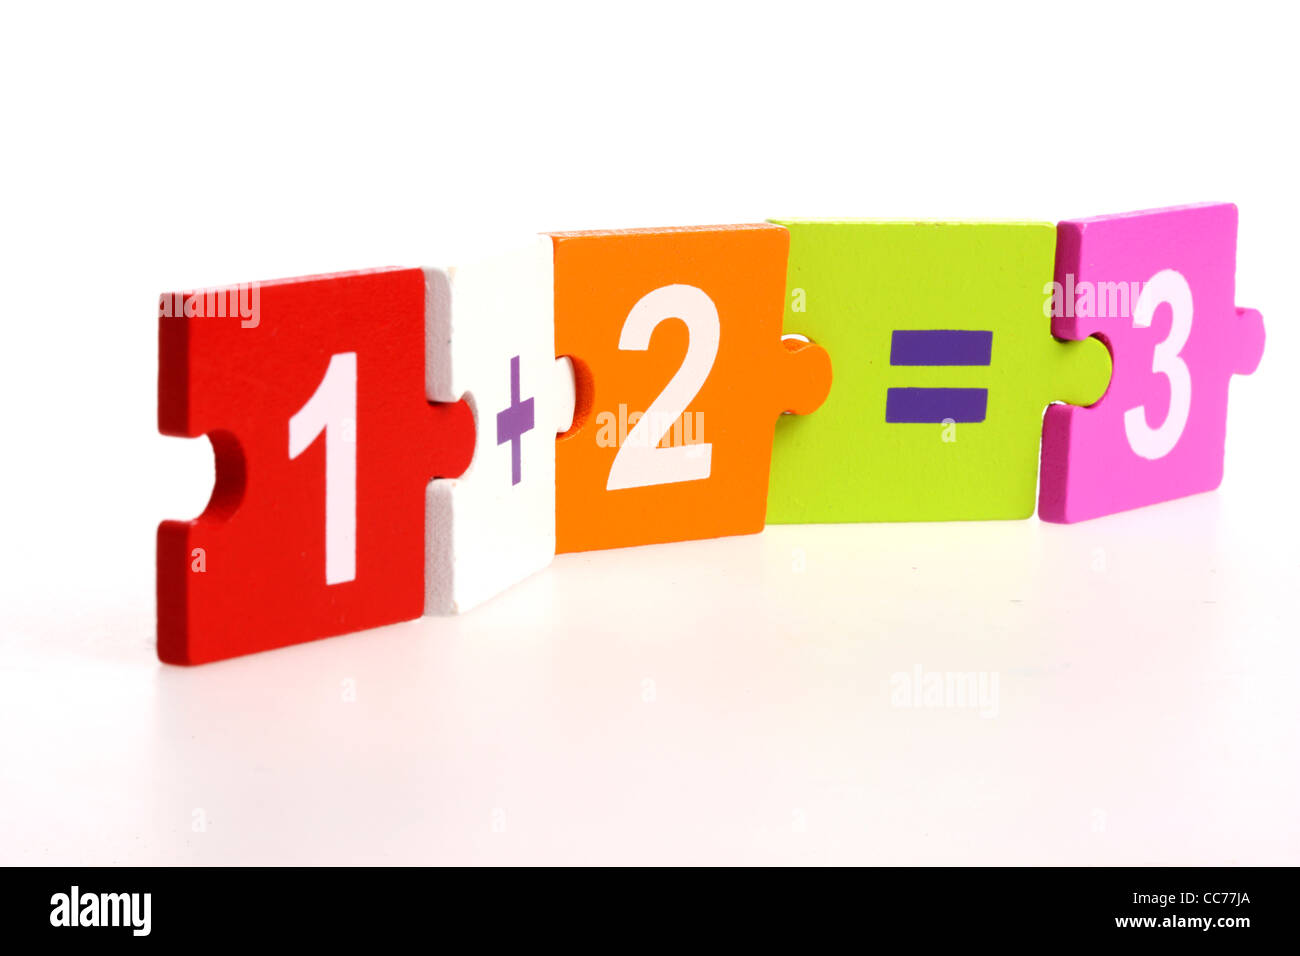 Mathematics puzzle, for kids. To learn mathematics while playing, basic arithmetic operations. Stock Photo